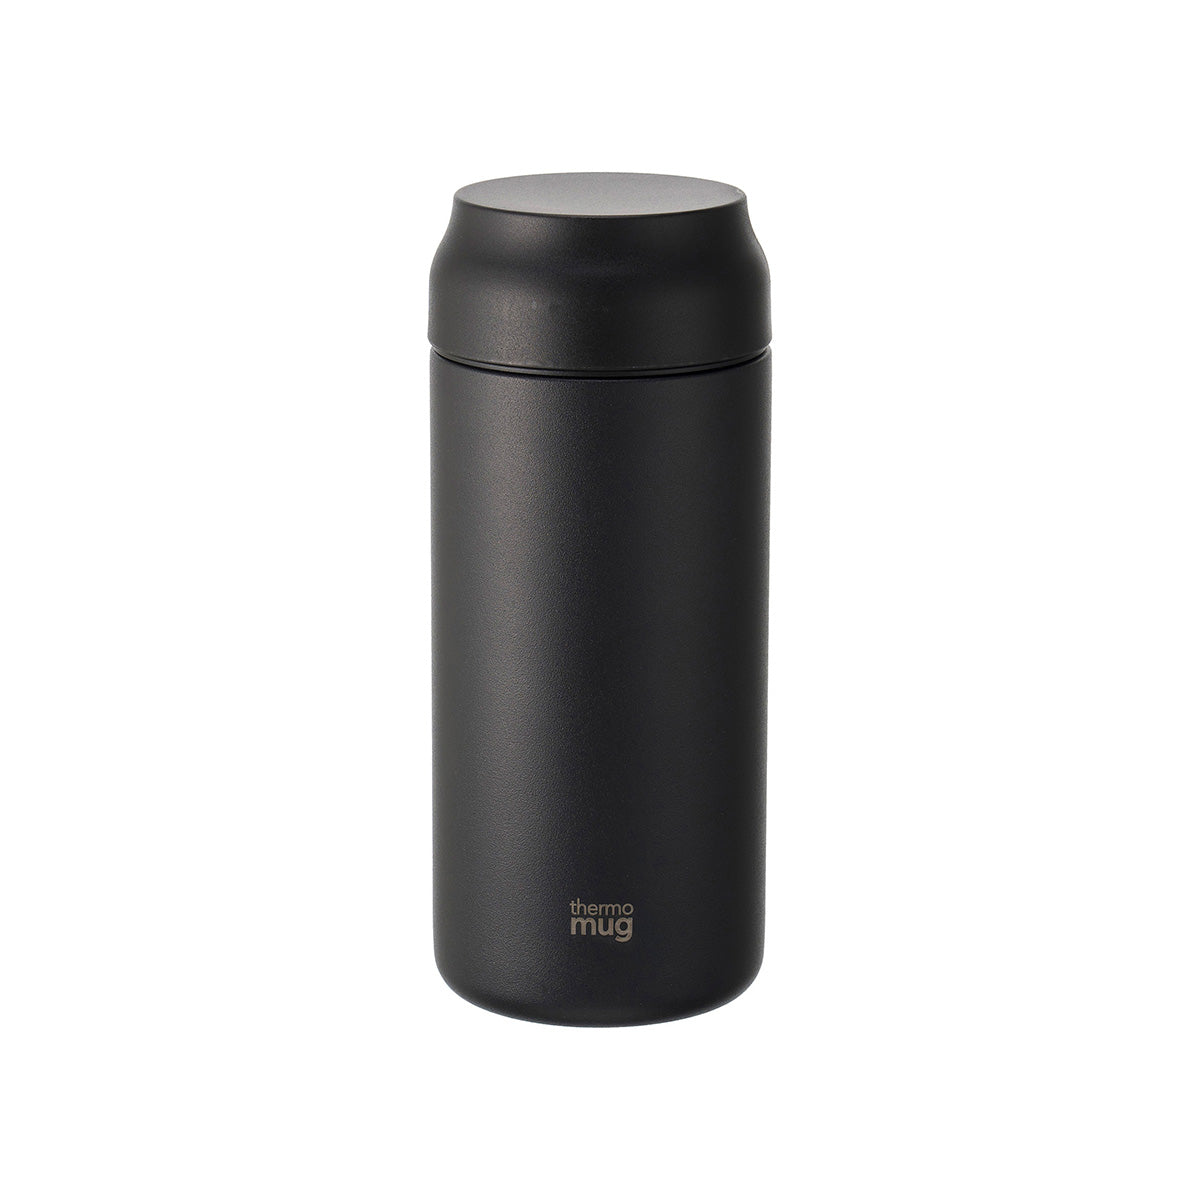 All Day Bottle, Black | Thermo Mug - Wake Concept Store  